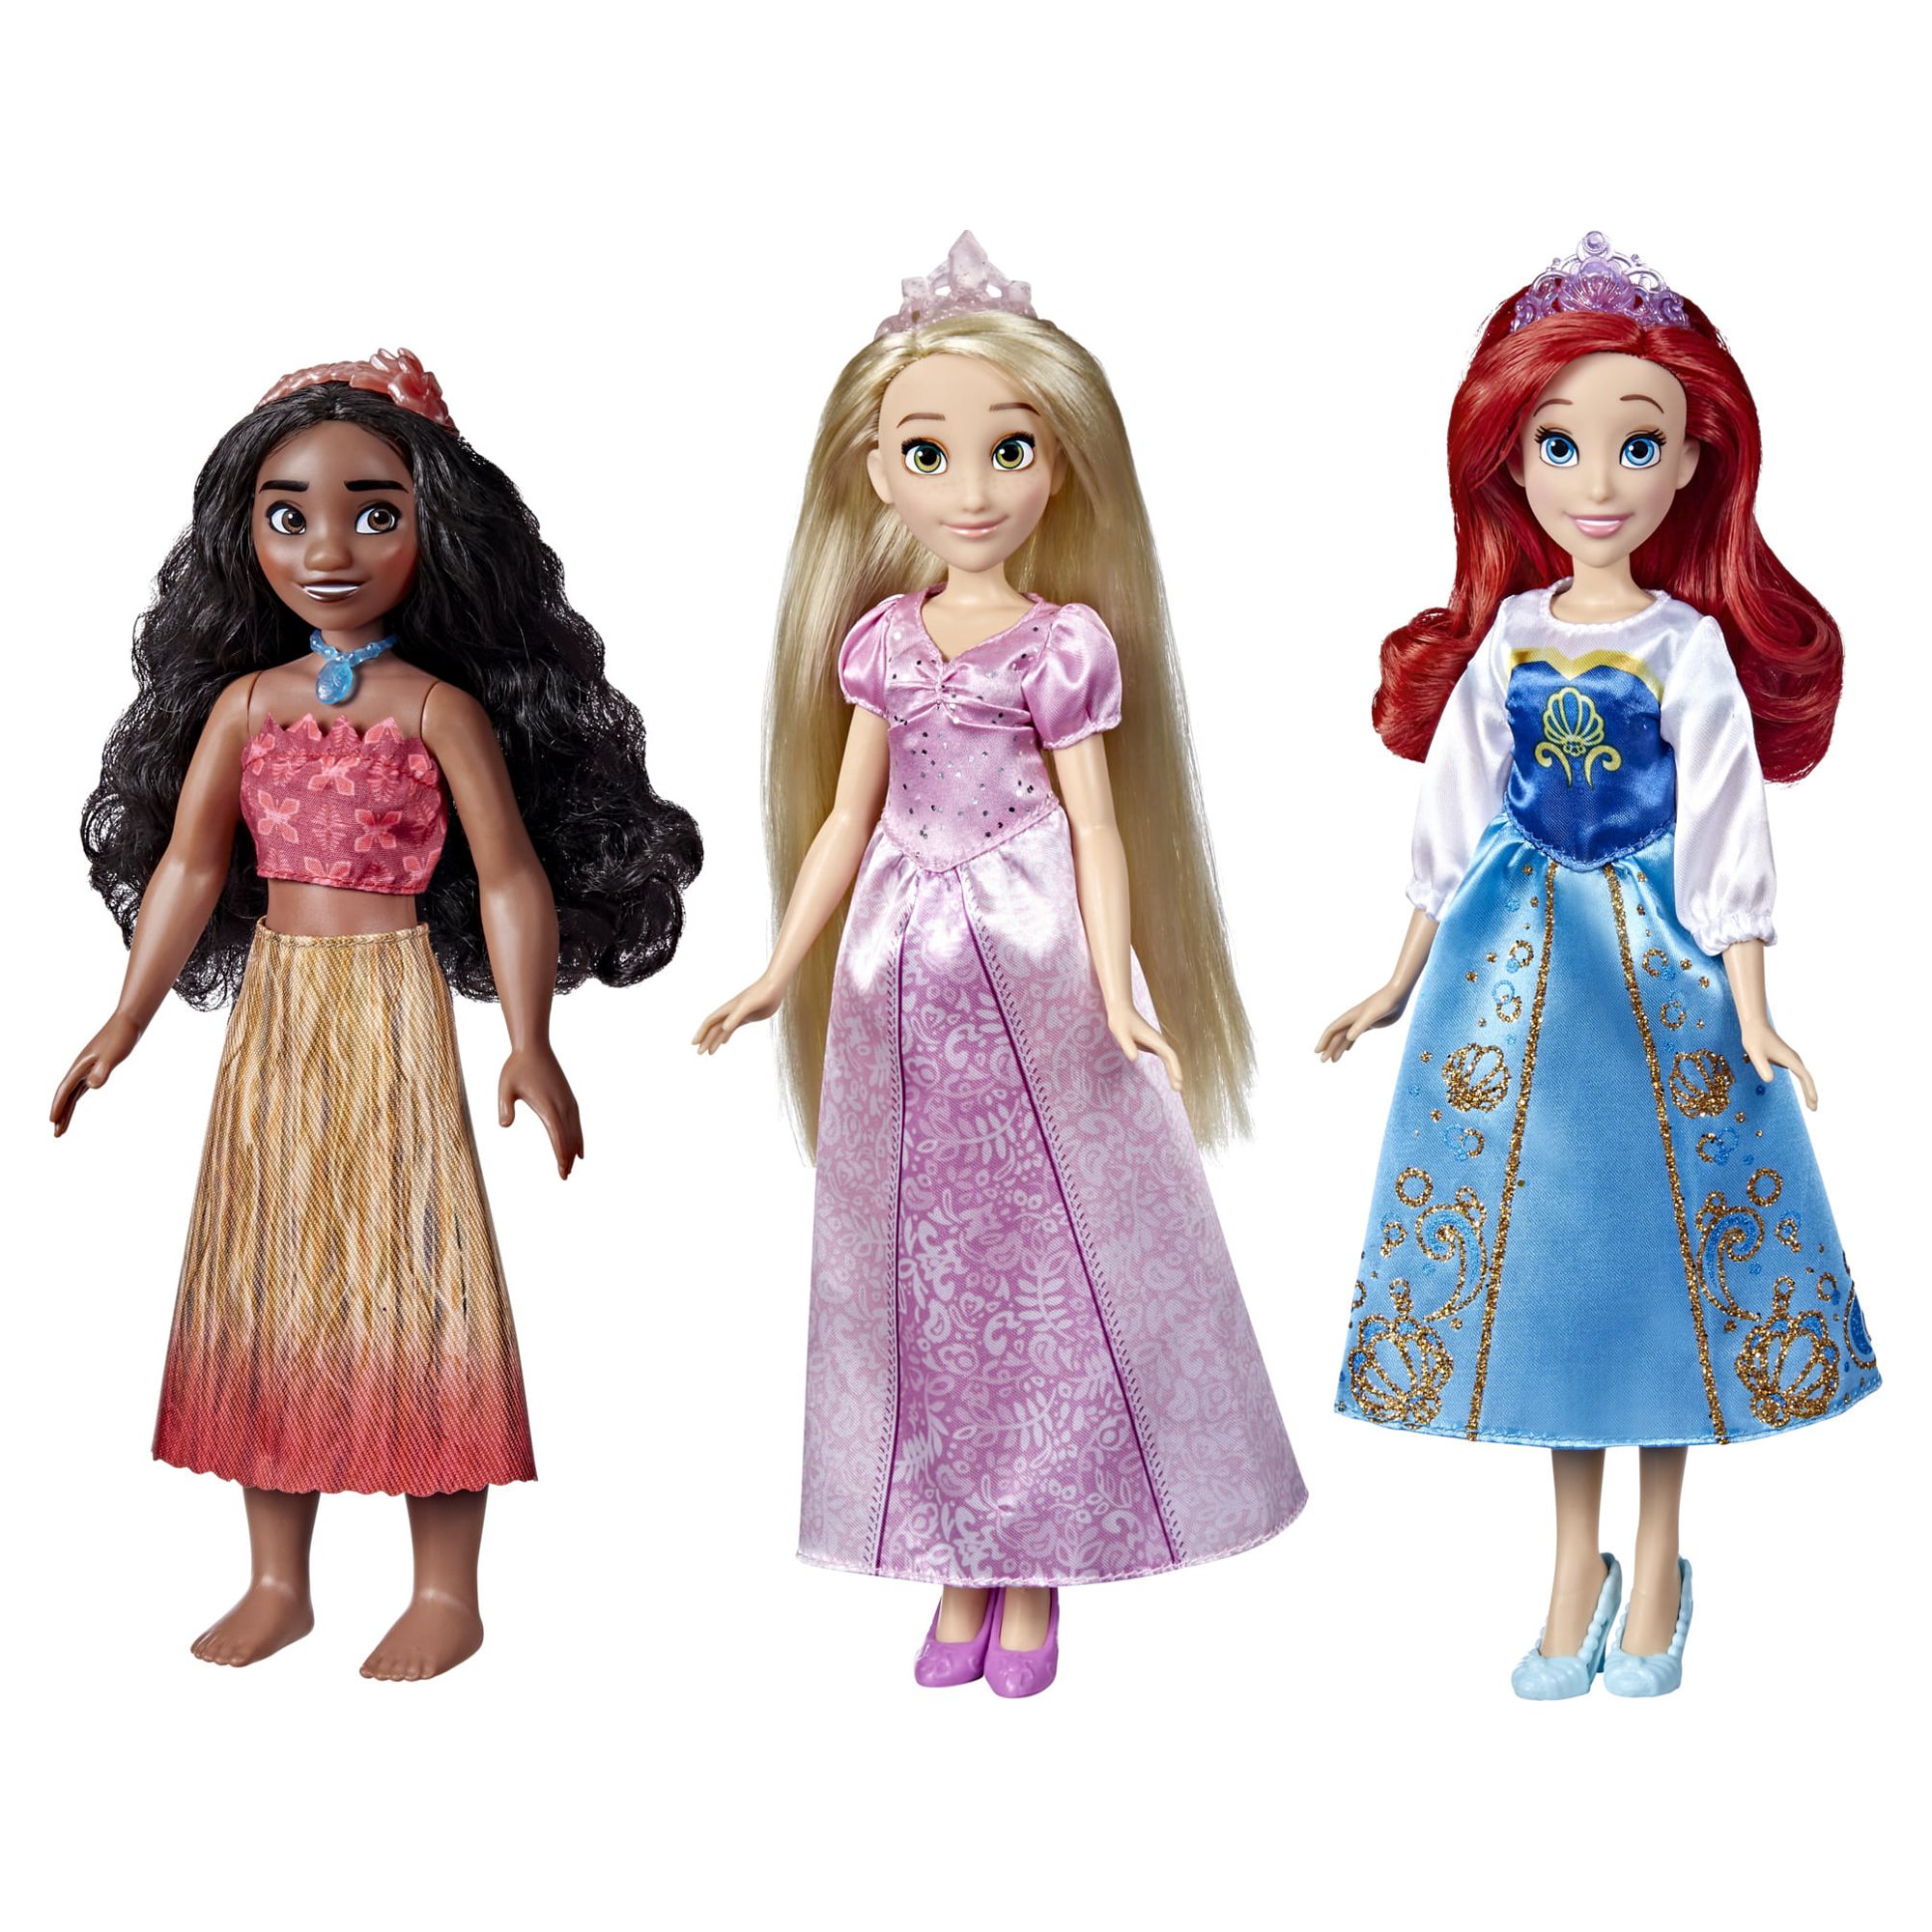 Disney Princess Royal Fashions and Friends 12 inch Fashion Doll, Ariel, Moana, and Rapunzel, Ages 4+ - image 4 of 5